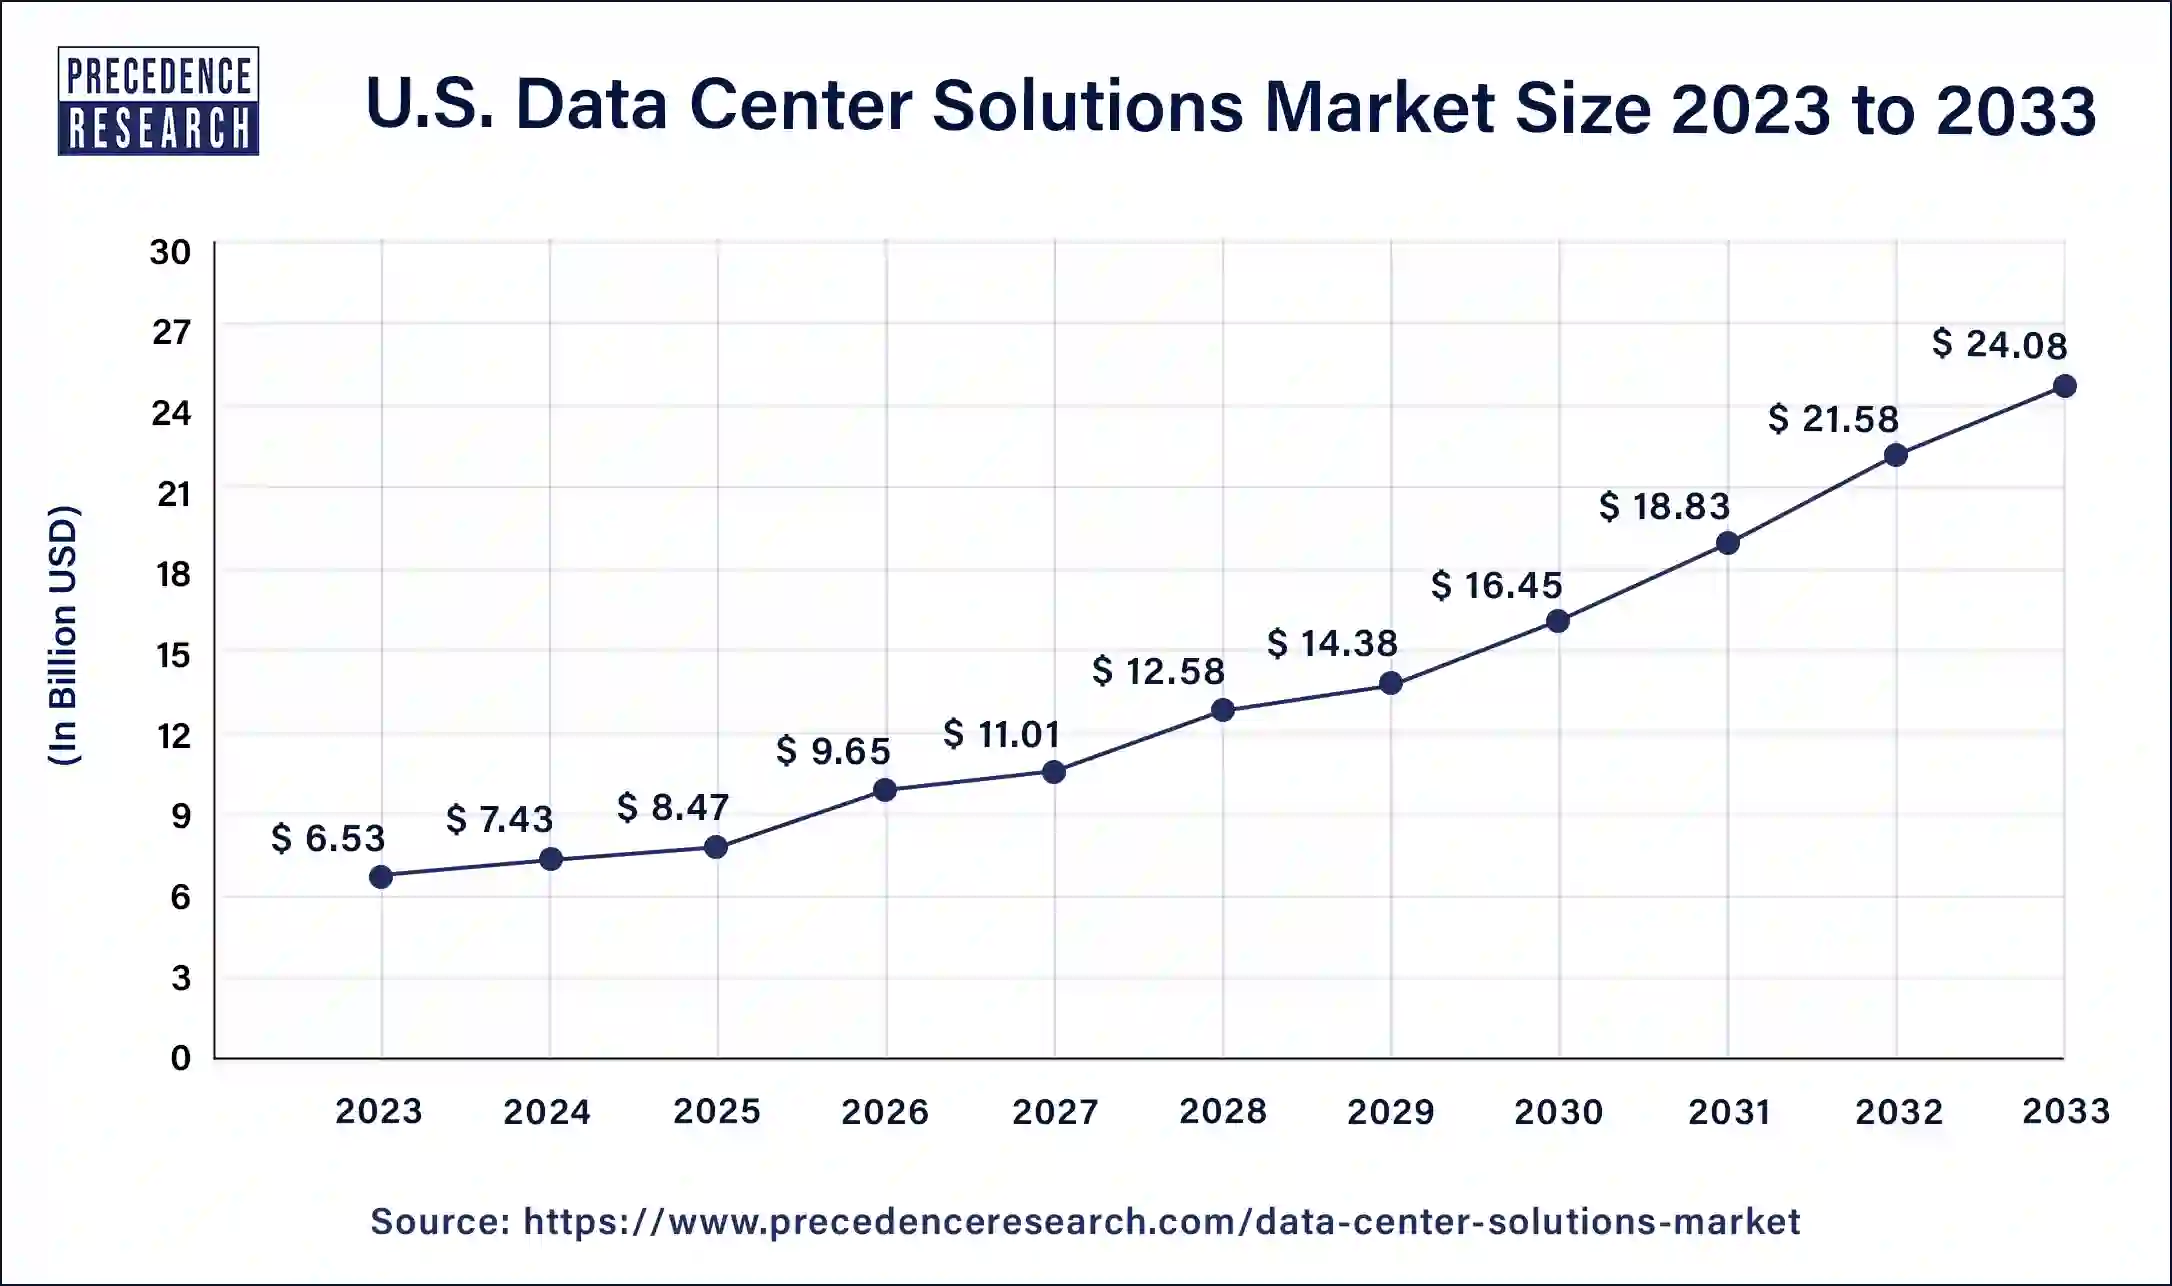 U.S. Data Center Solutions Market Size 2024 to 2033